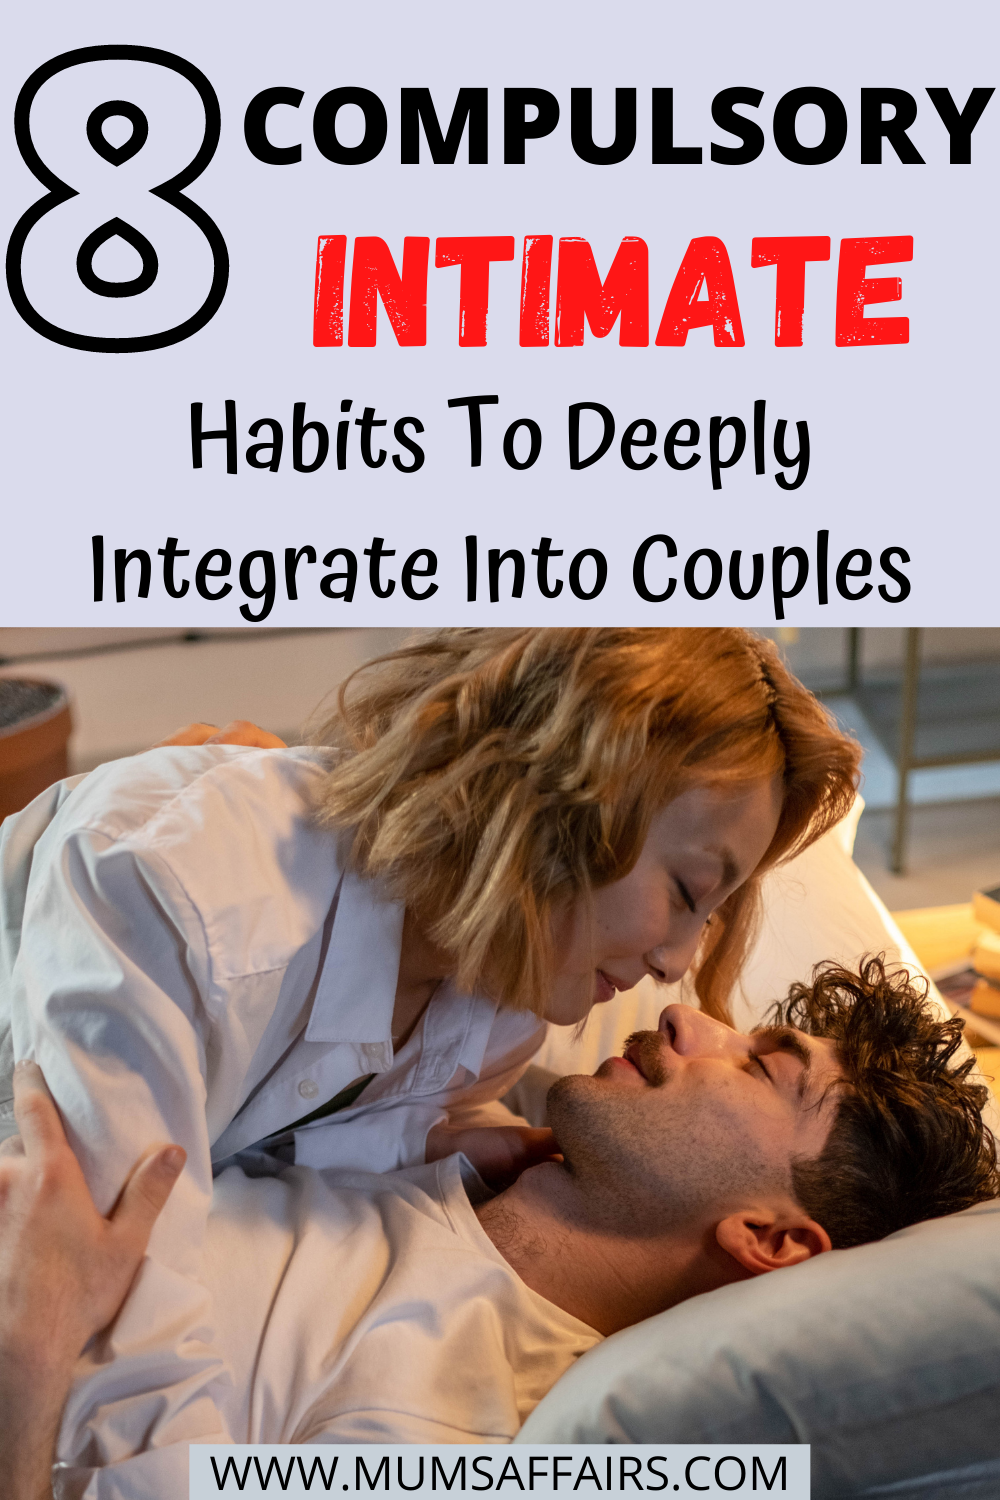 8 Must-Do Intimate Habits To Deeply Integrate Into Couples